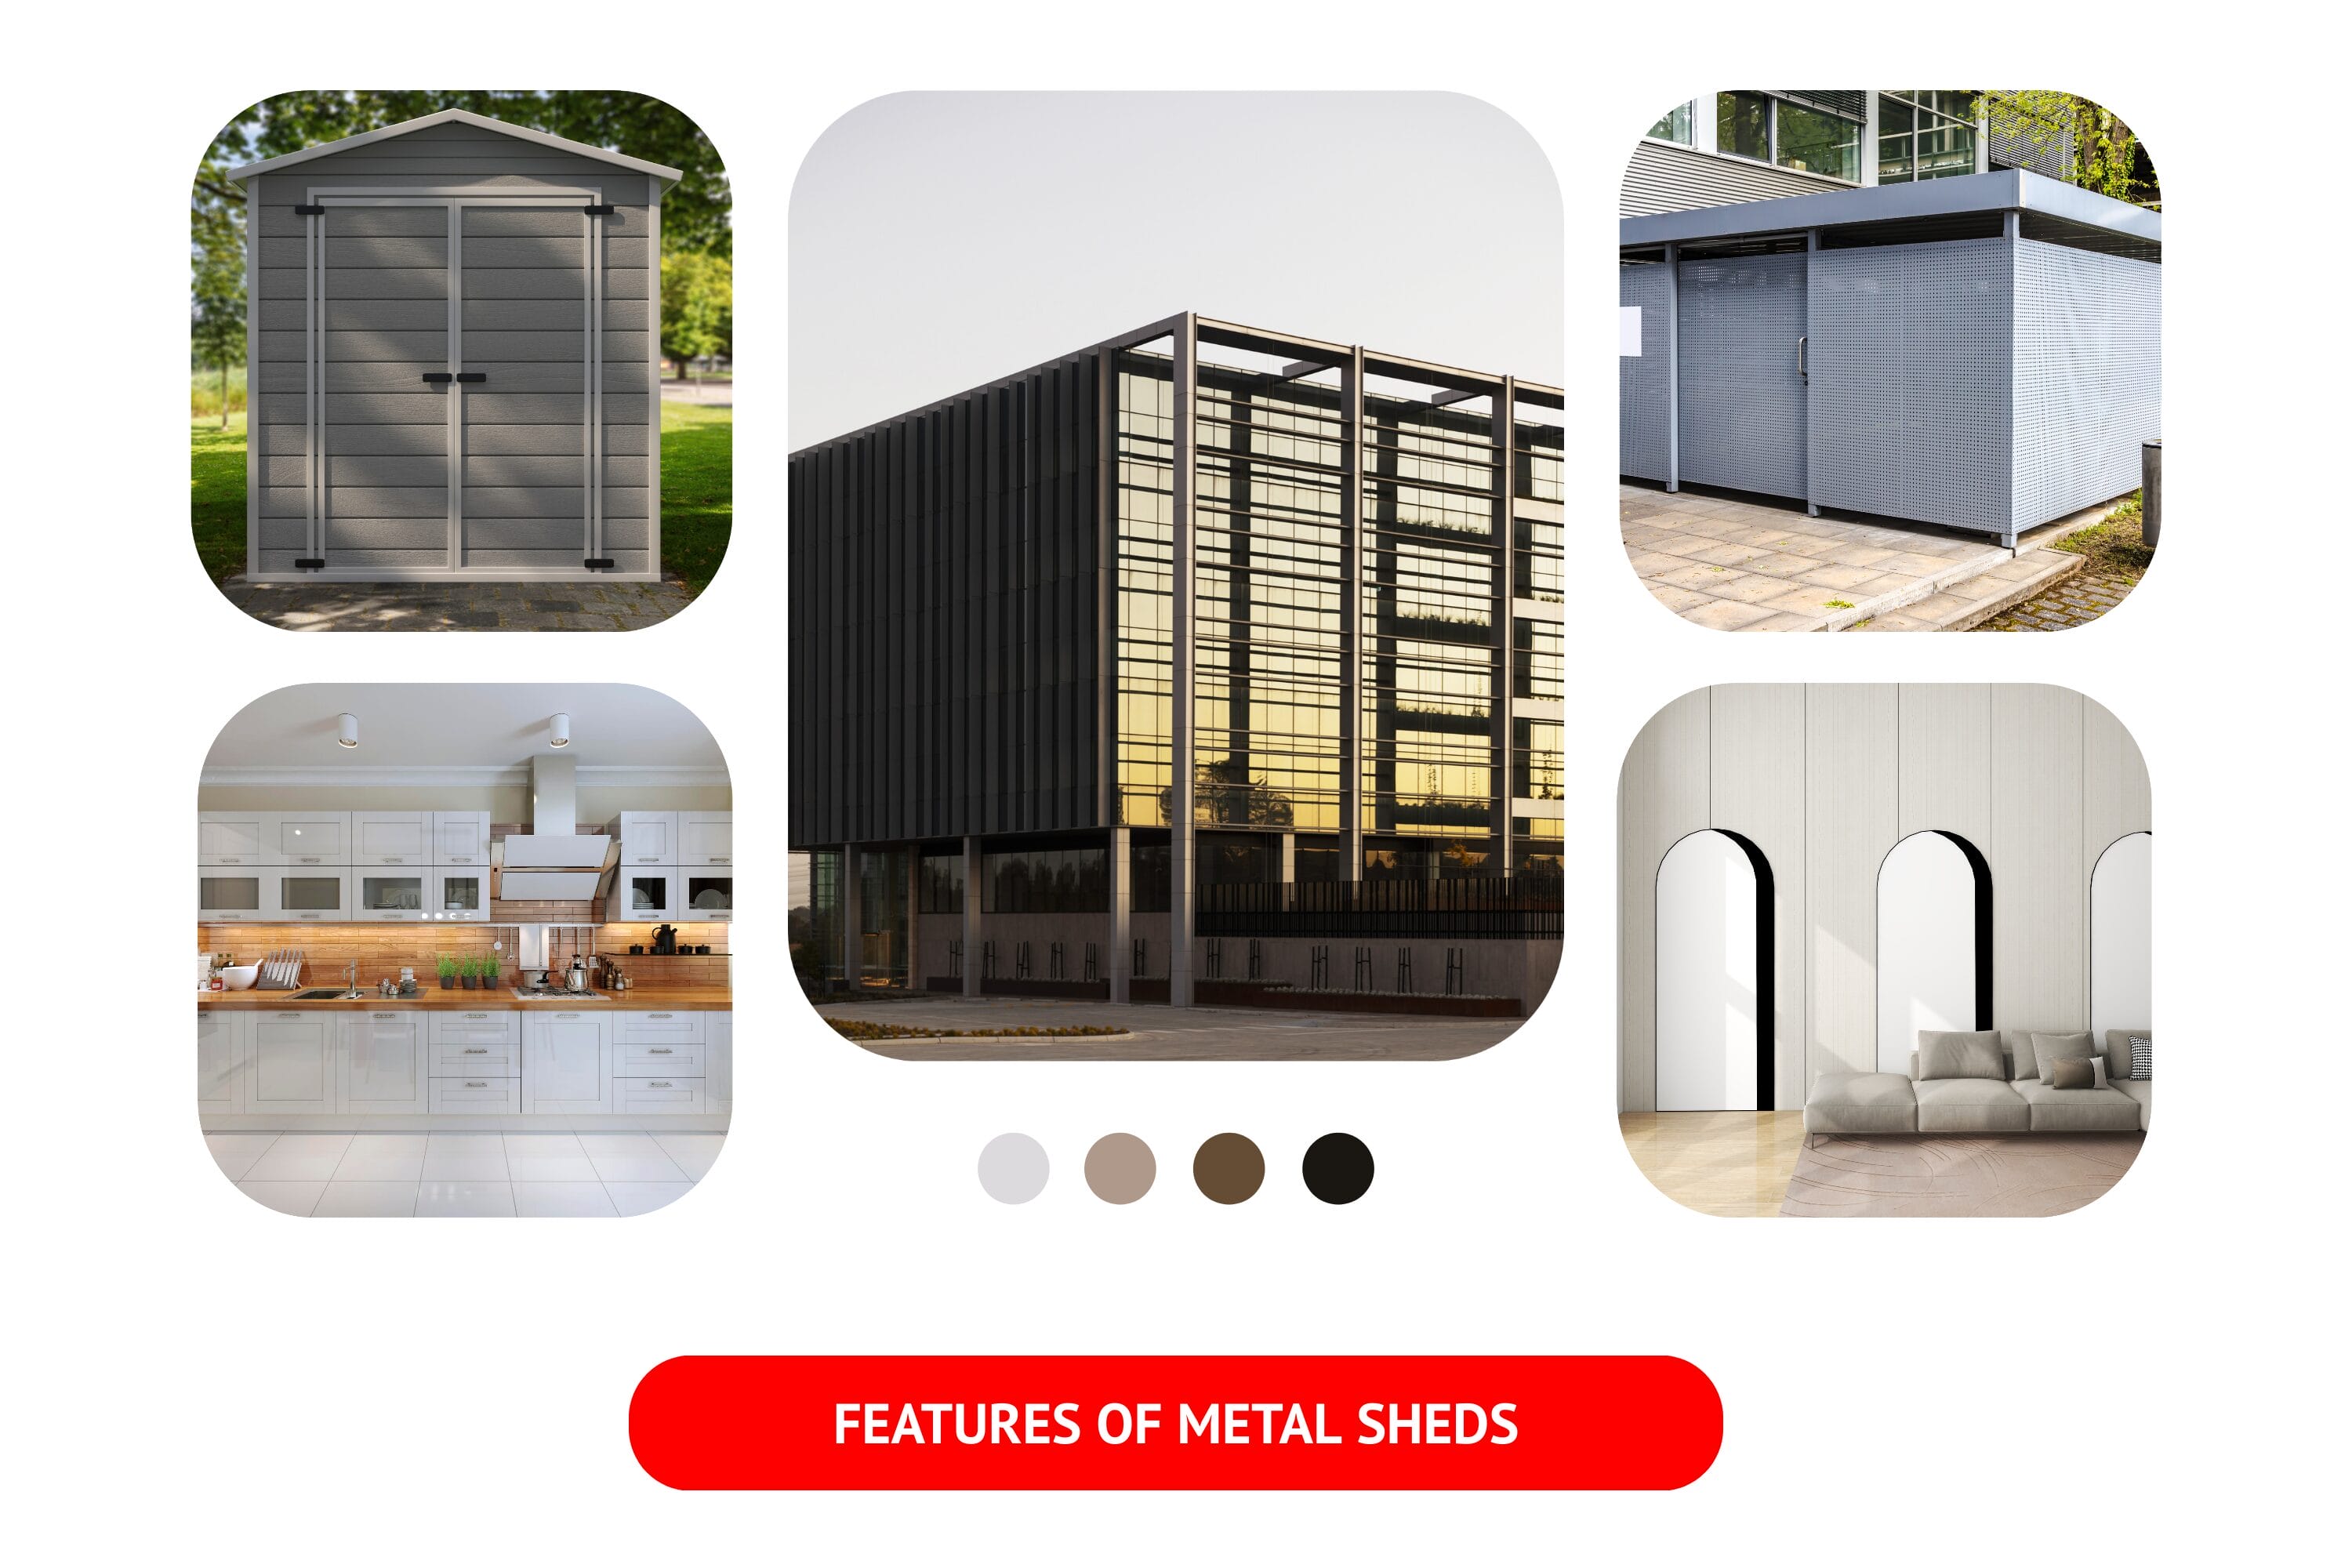 Metal sheds come with a range of incredible features that make them a top choice for outdoor storage.